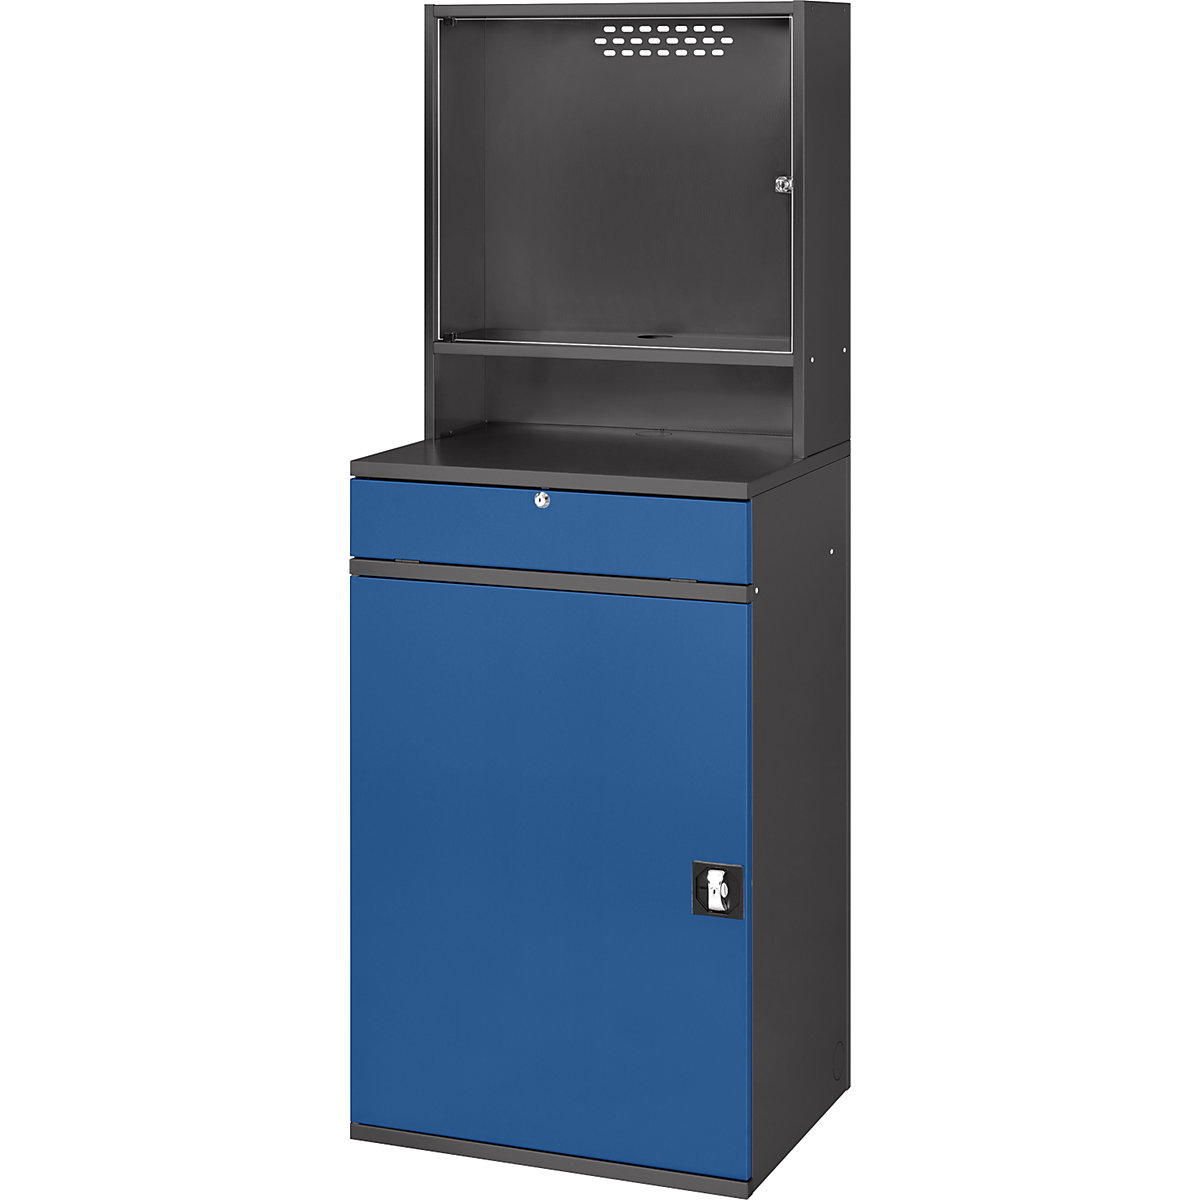 RAU – Computer workstation, monitor housing, 1 pull-out shelf, width 650 mm, charcoal / gentian blue